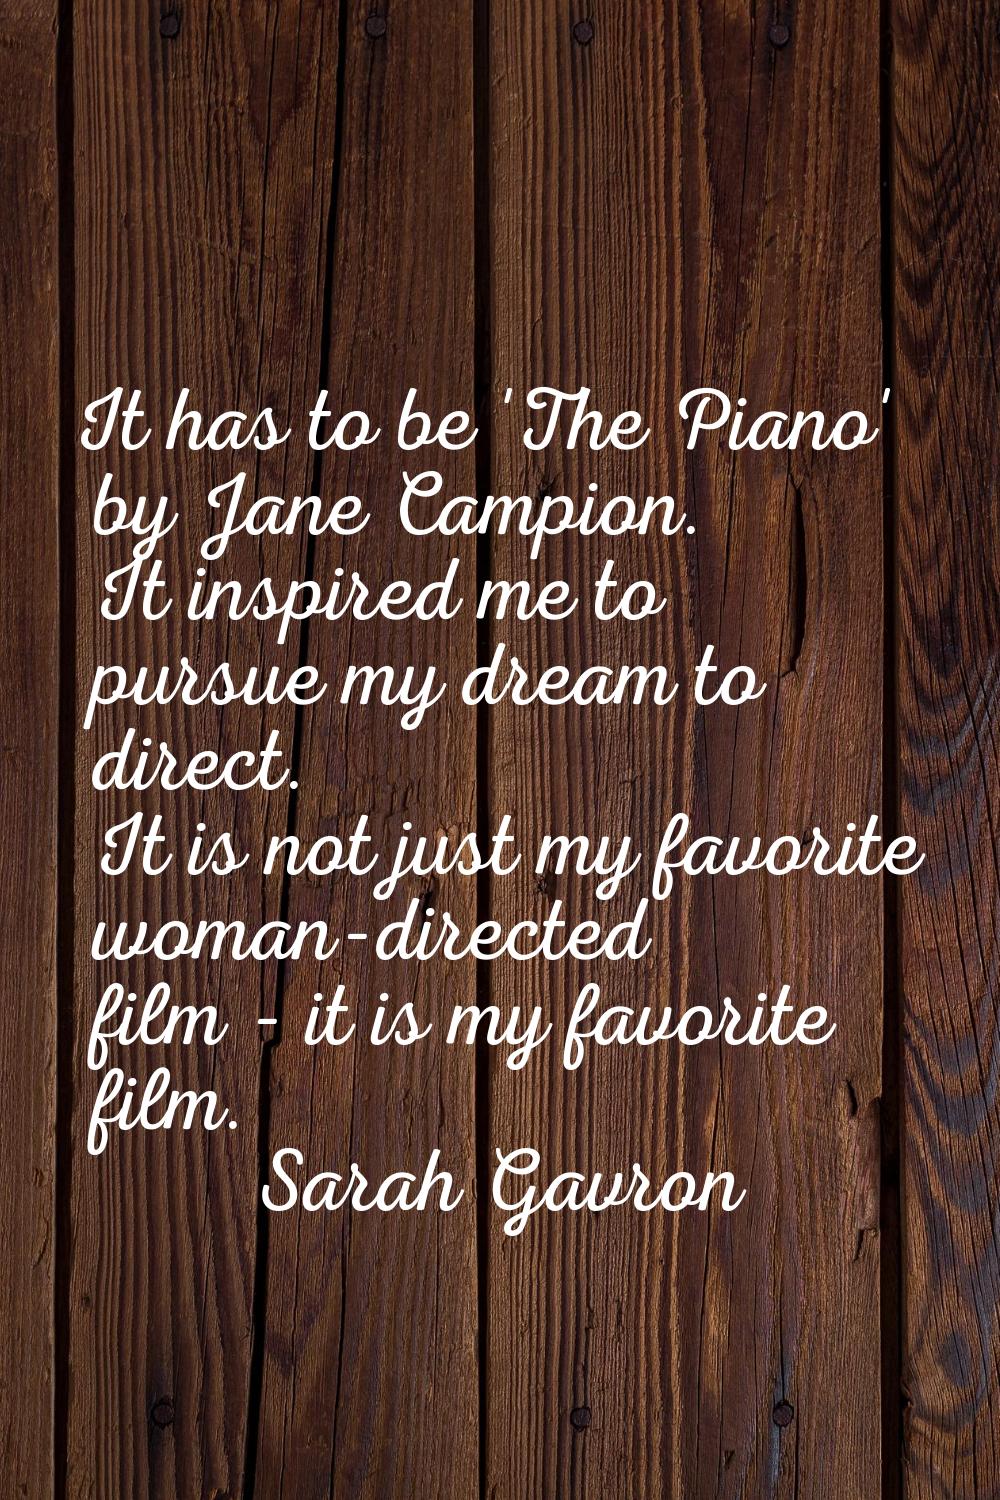 It has to be 'The Piano' by Jane Campion. It inspired me to pursue my dream to direct. It is not ju